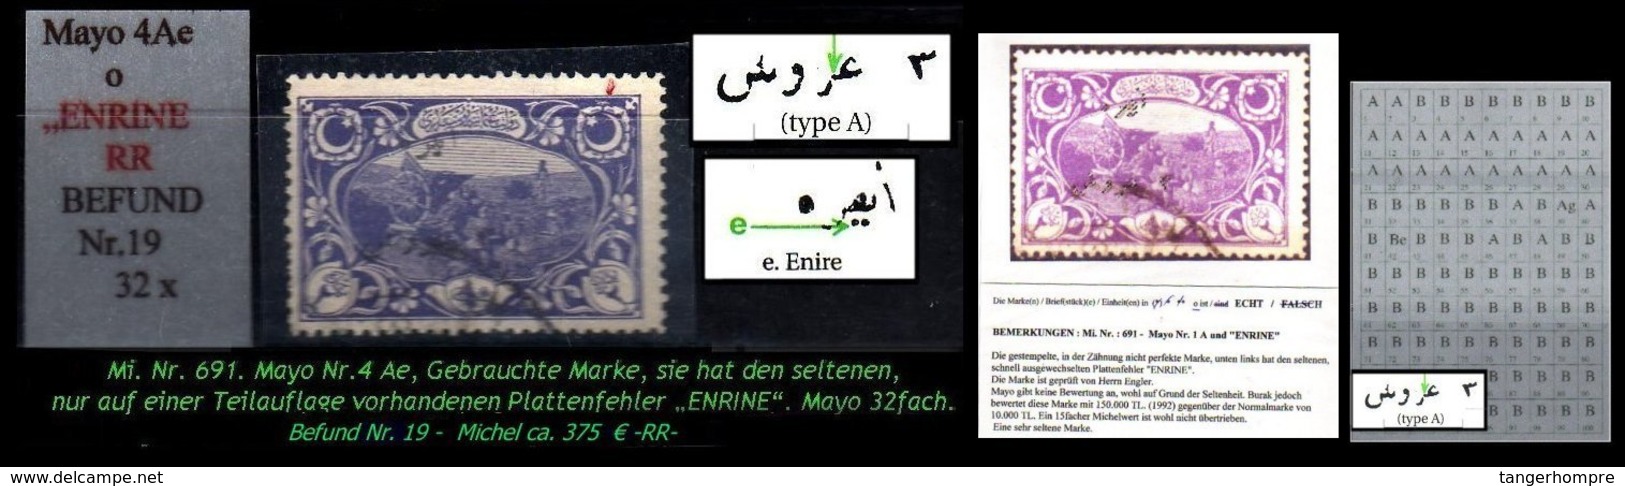 TURKEY ,EARLY OTTOMAN SPECIALIZED FOR SPECIALIST, SEE...Mi. Nr. 691 Type B - Plattenfehler -RRR- - 1920-21 Anatolie